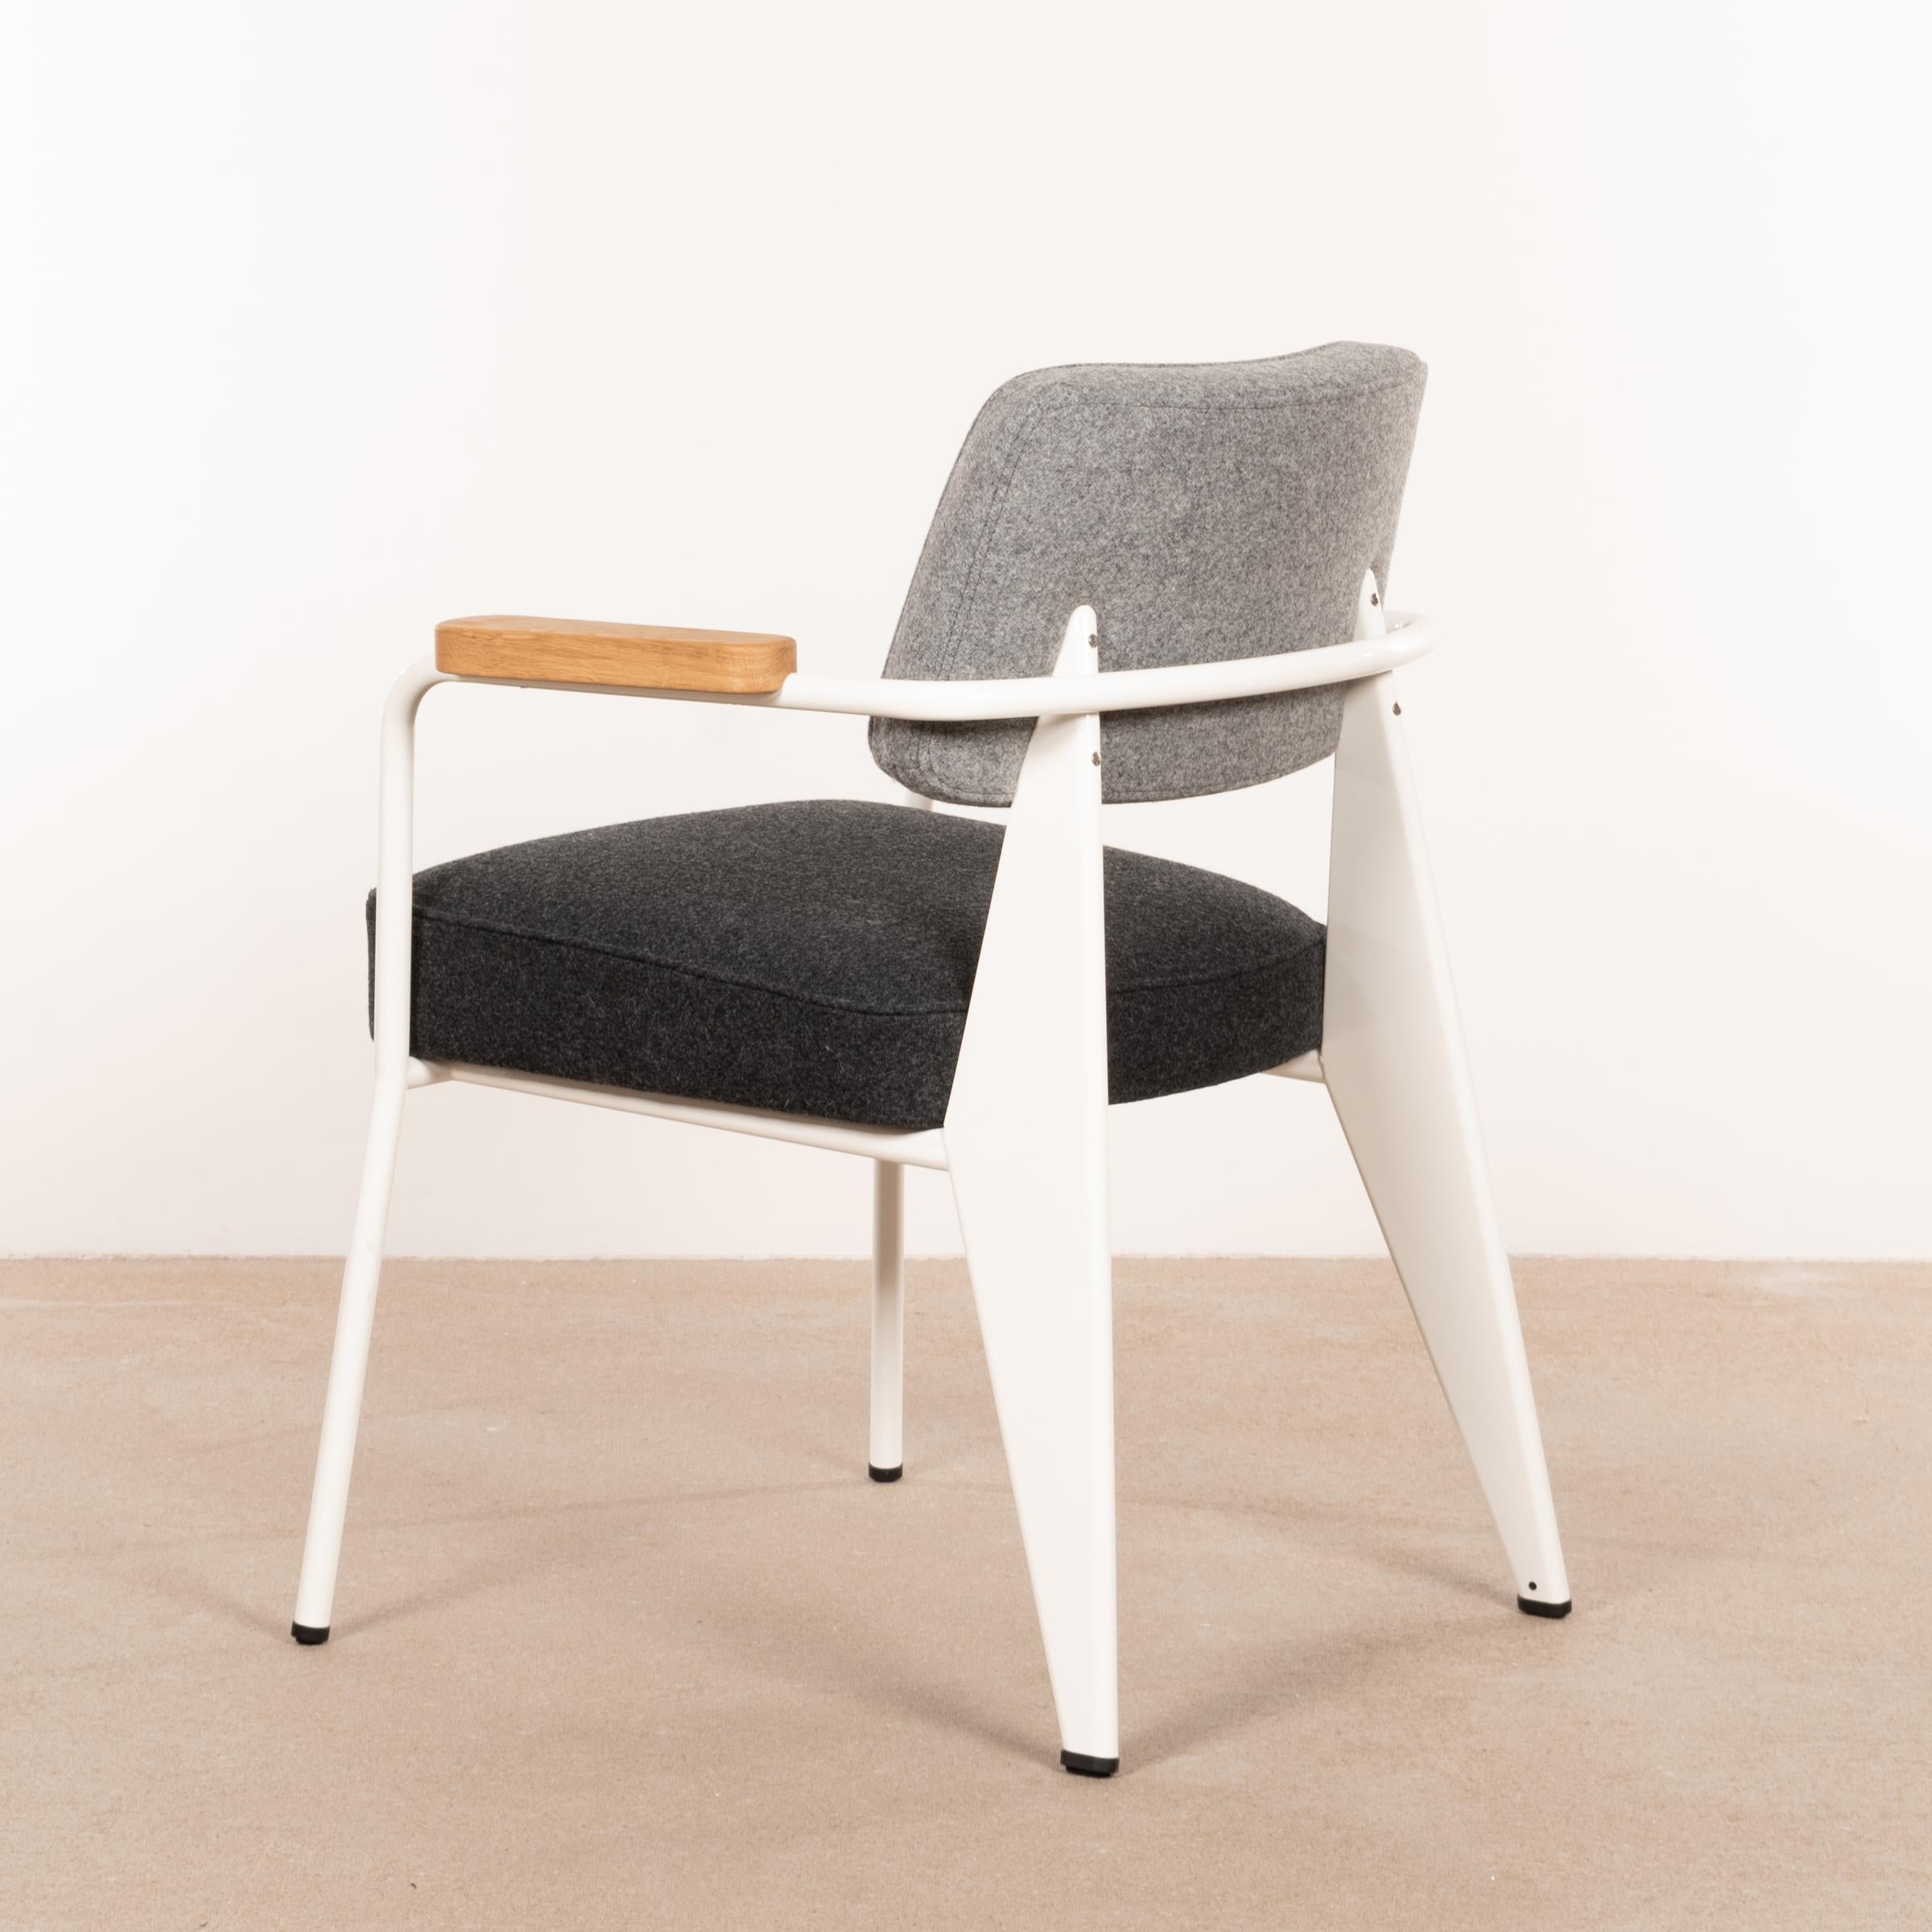 Iconic Fauteuil Direction designed by Jean Prouvé in 1951 and manufactured by Vitra in 2019. White powder-coated frame with cushions in dark en medium grey wool. Excellent new condition and labelled. Currently two chairs available.